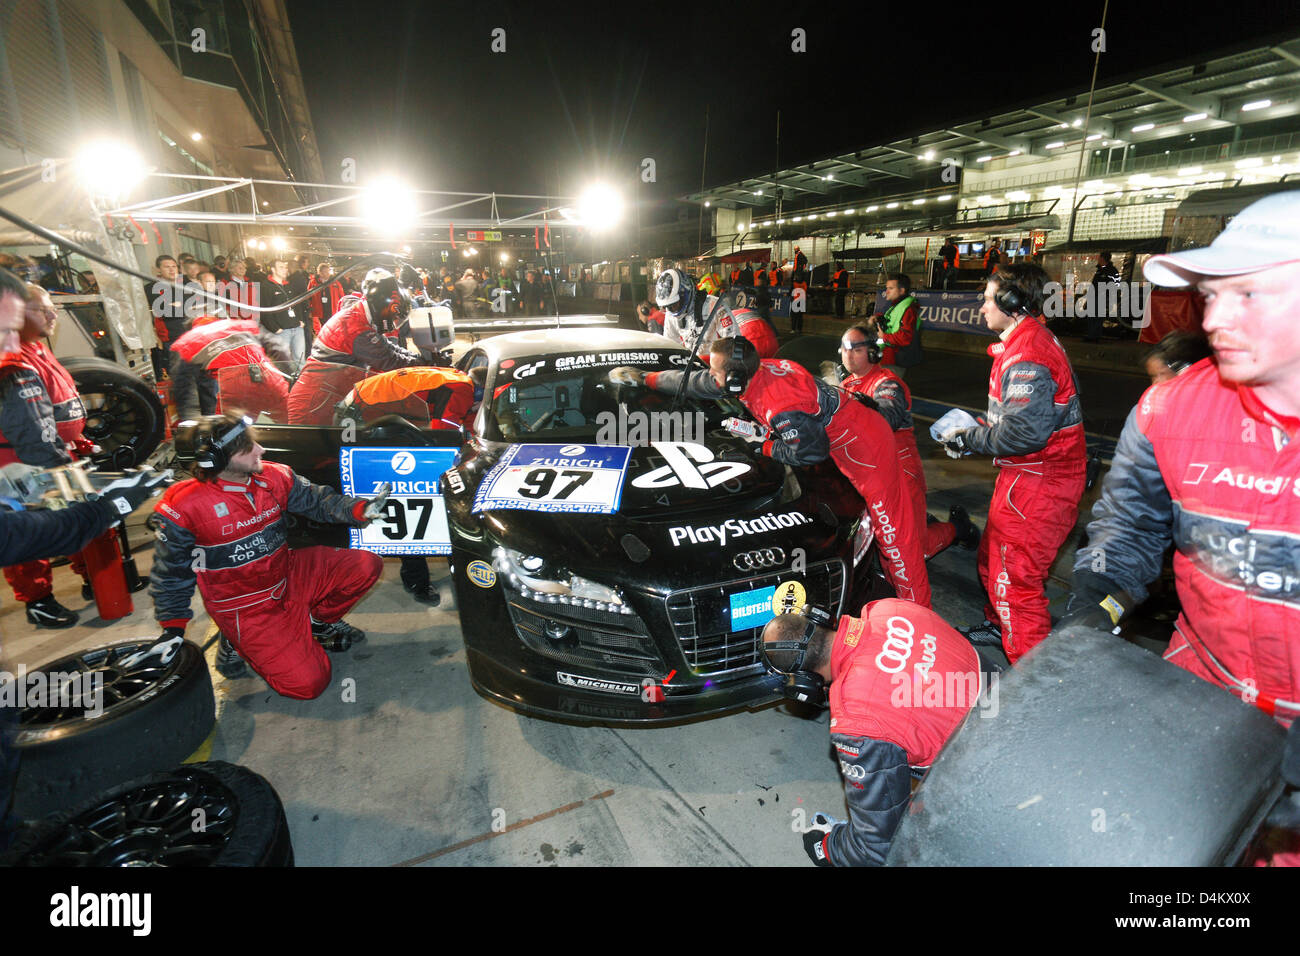 The Audi R8 of Abt-Sportsline Team piloted by Abt, Luhr, Hemboulle and Kaffer is serviced in the pitlane during the Nuerburgring 24 hours race, Nuerburgring, Germany, 24 May 2009. Photo: Thomas Frey Stock Photo